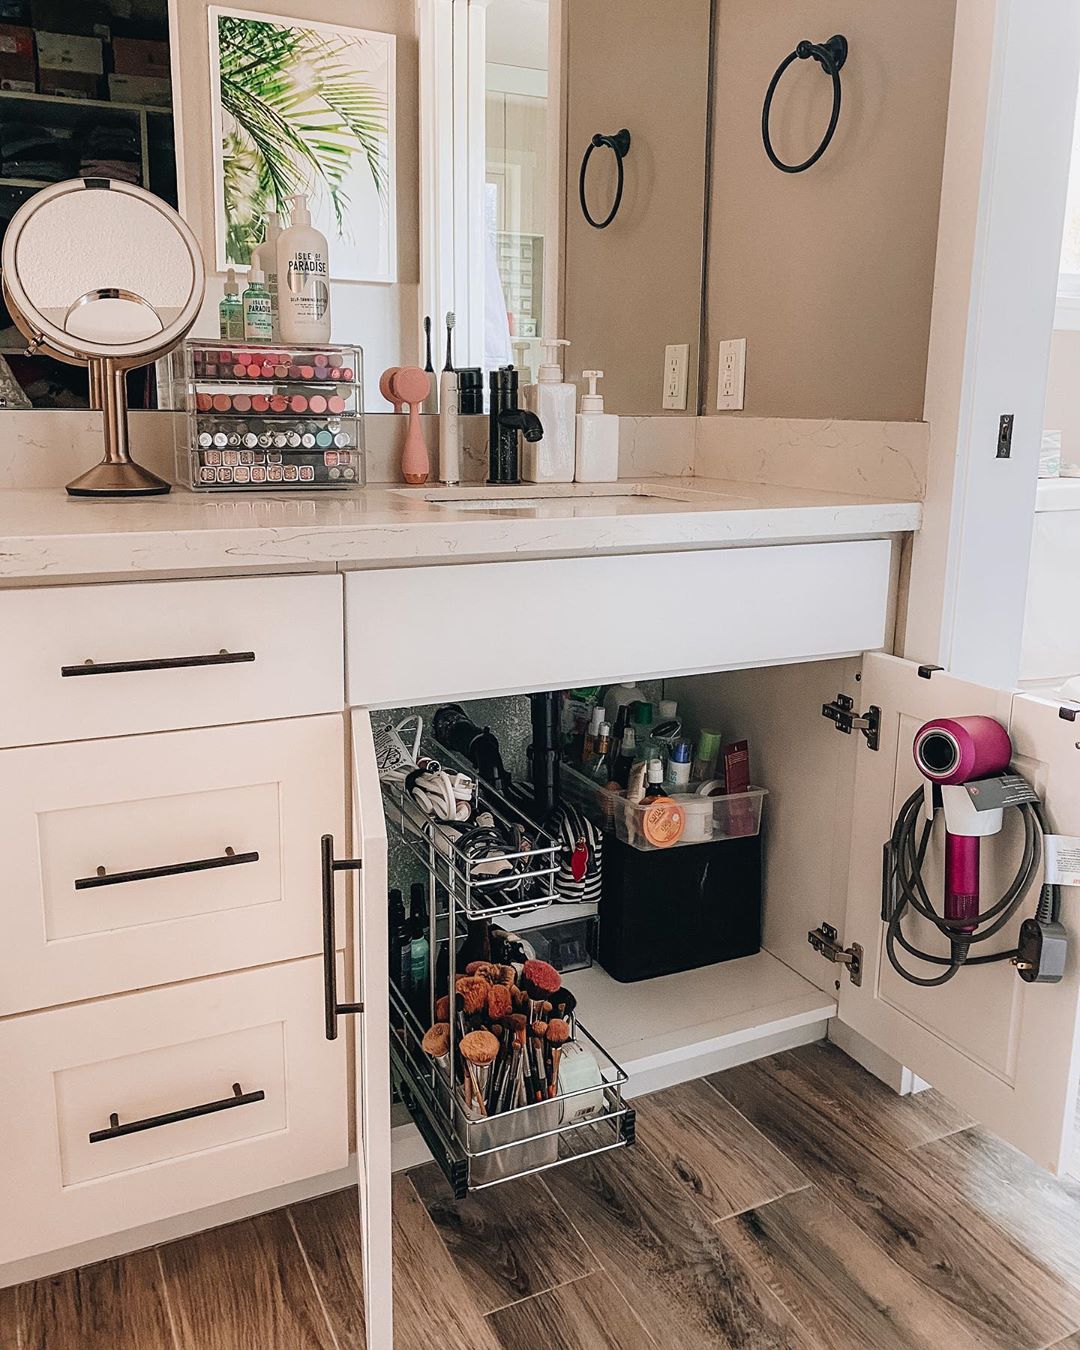 Storage added to the back of vanity cabinet doors in the bathroom. Photo by Instagram user @tiffanyish